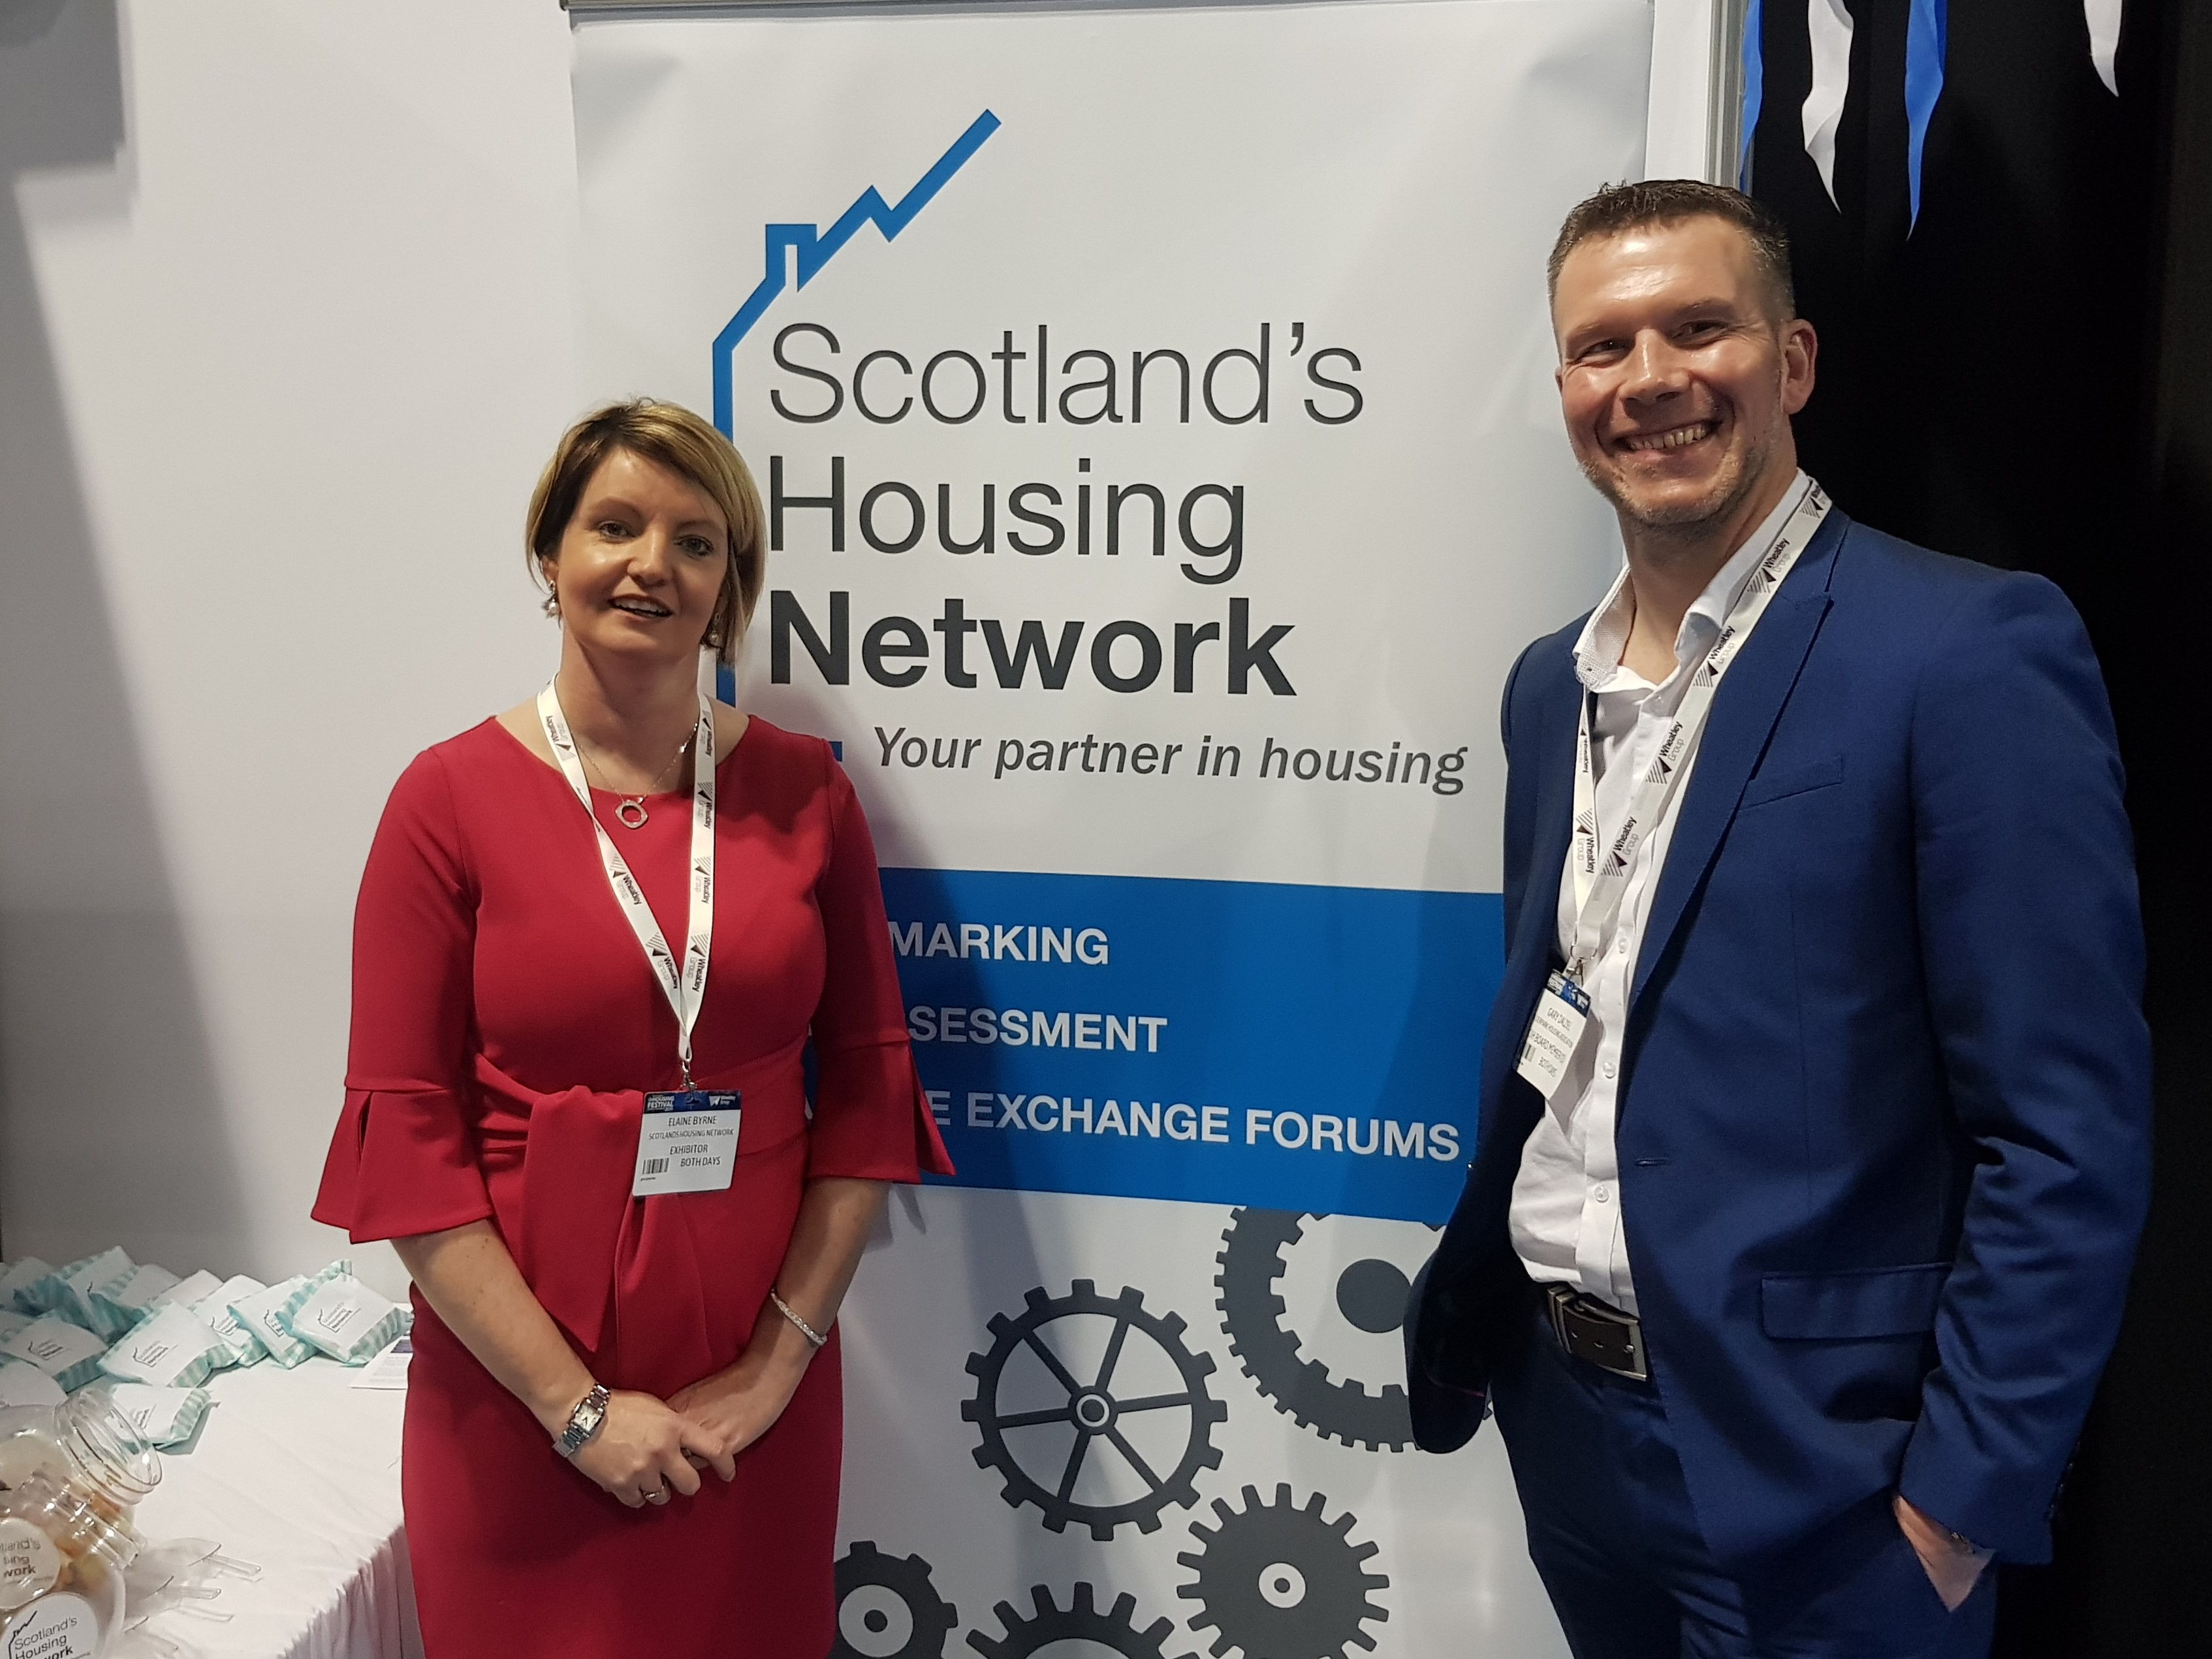 Scotland’s Housing Network going from strength to strength with new members